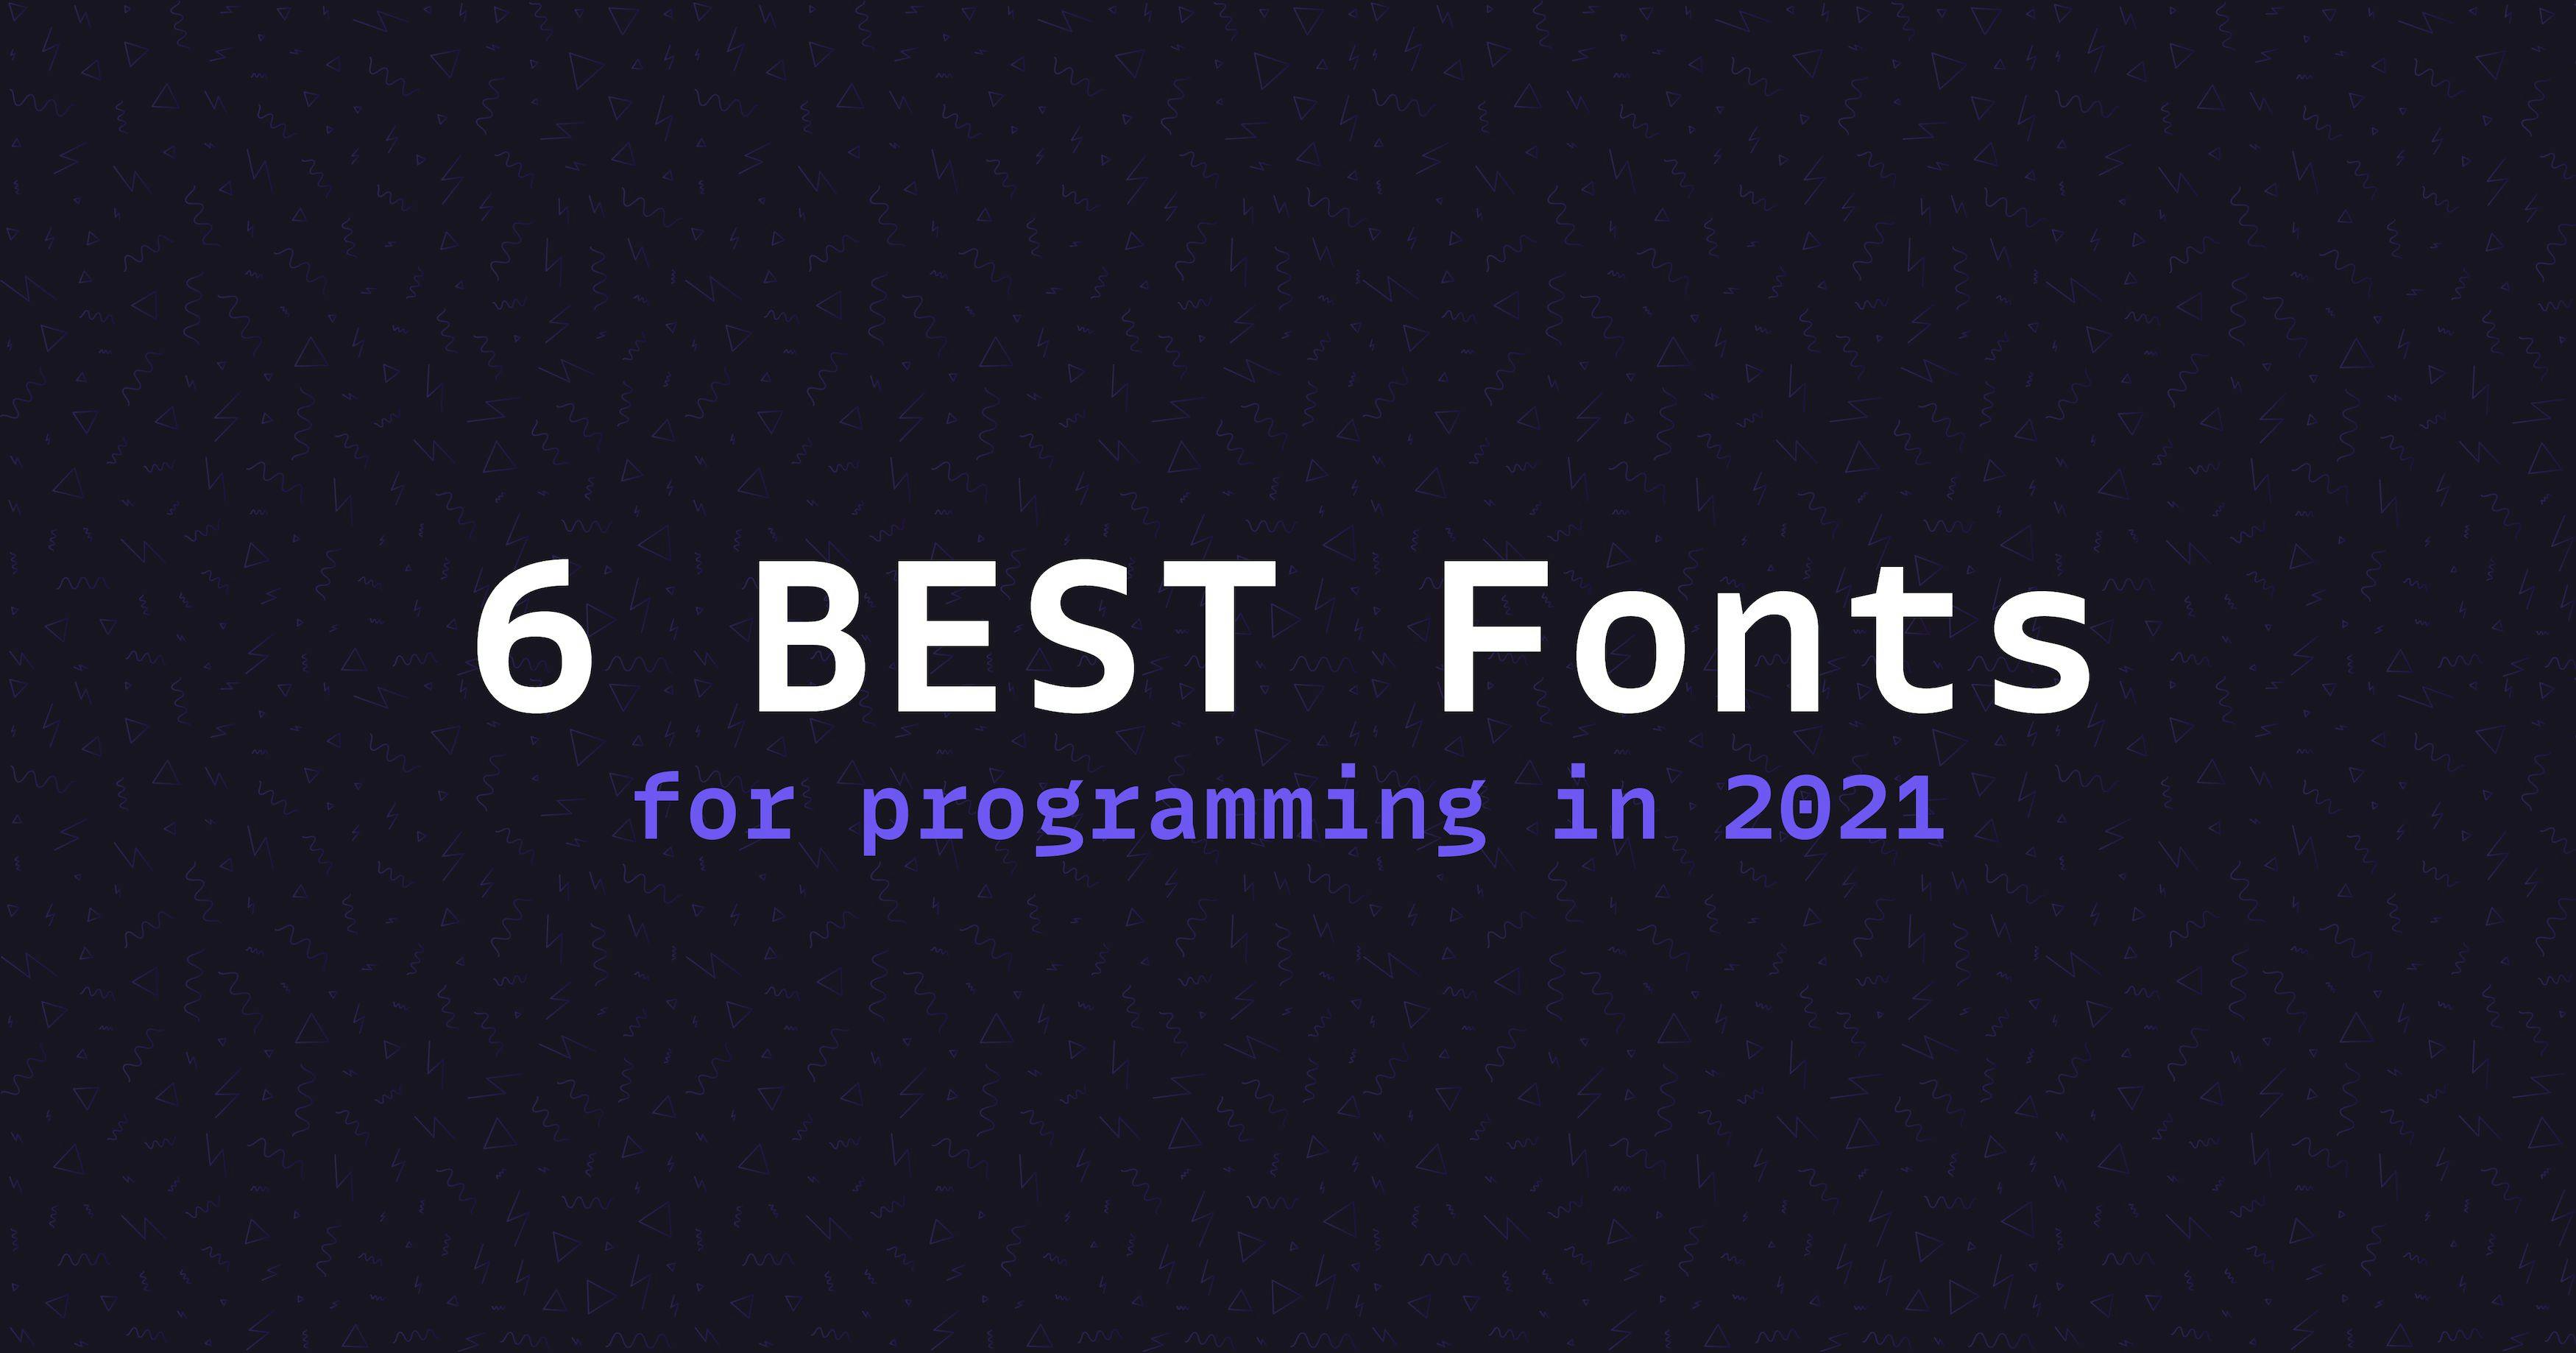 featured image - Reduce Your Eye Fatigue With These Top 6 Fonts for Easier Programming in 2021